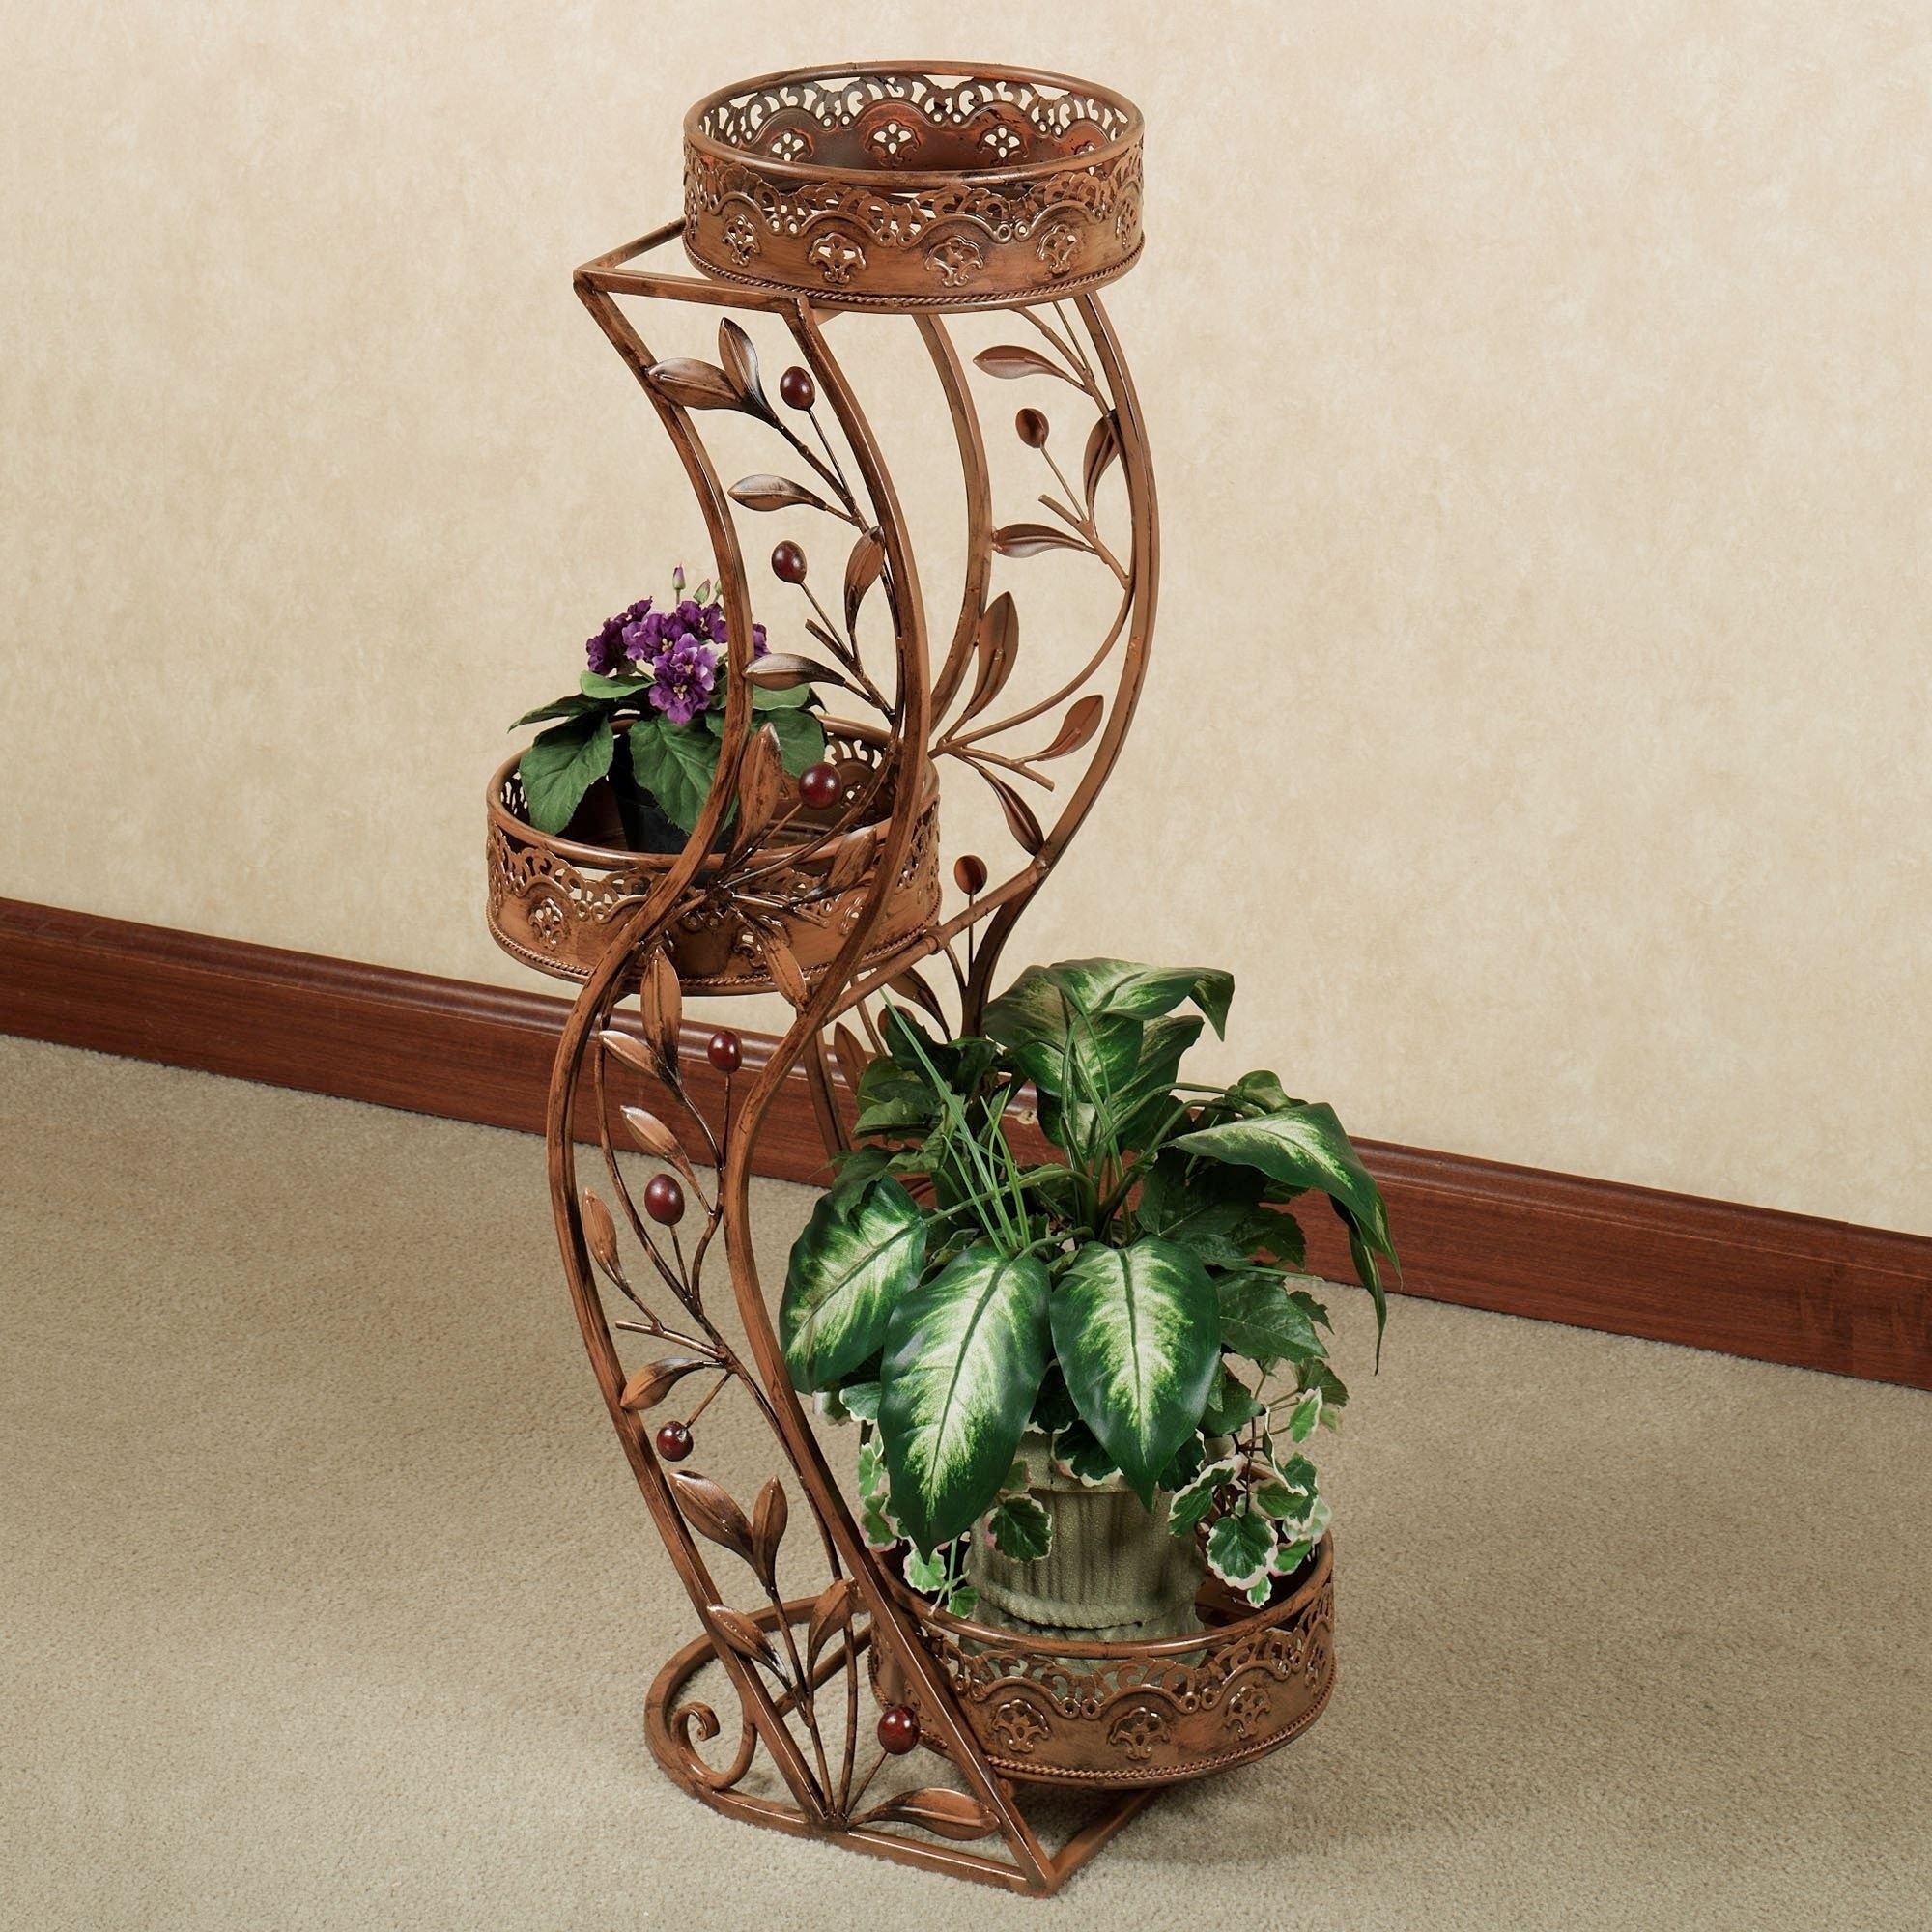 Tiered plant stands